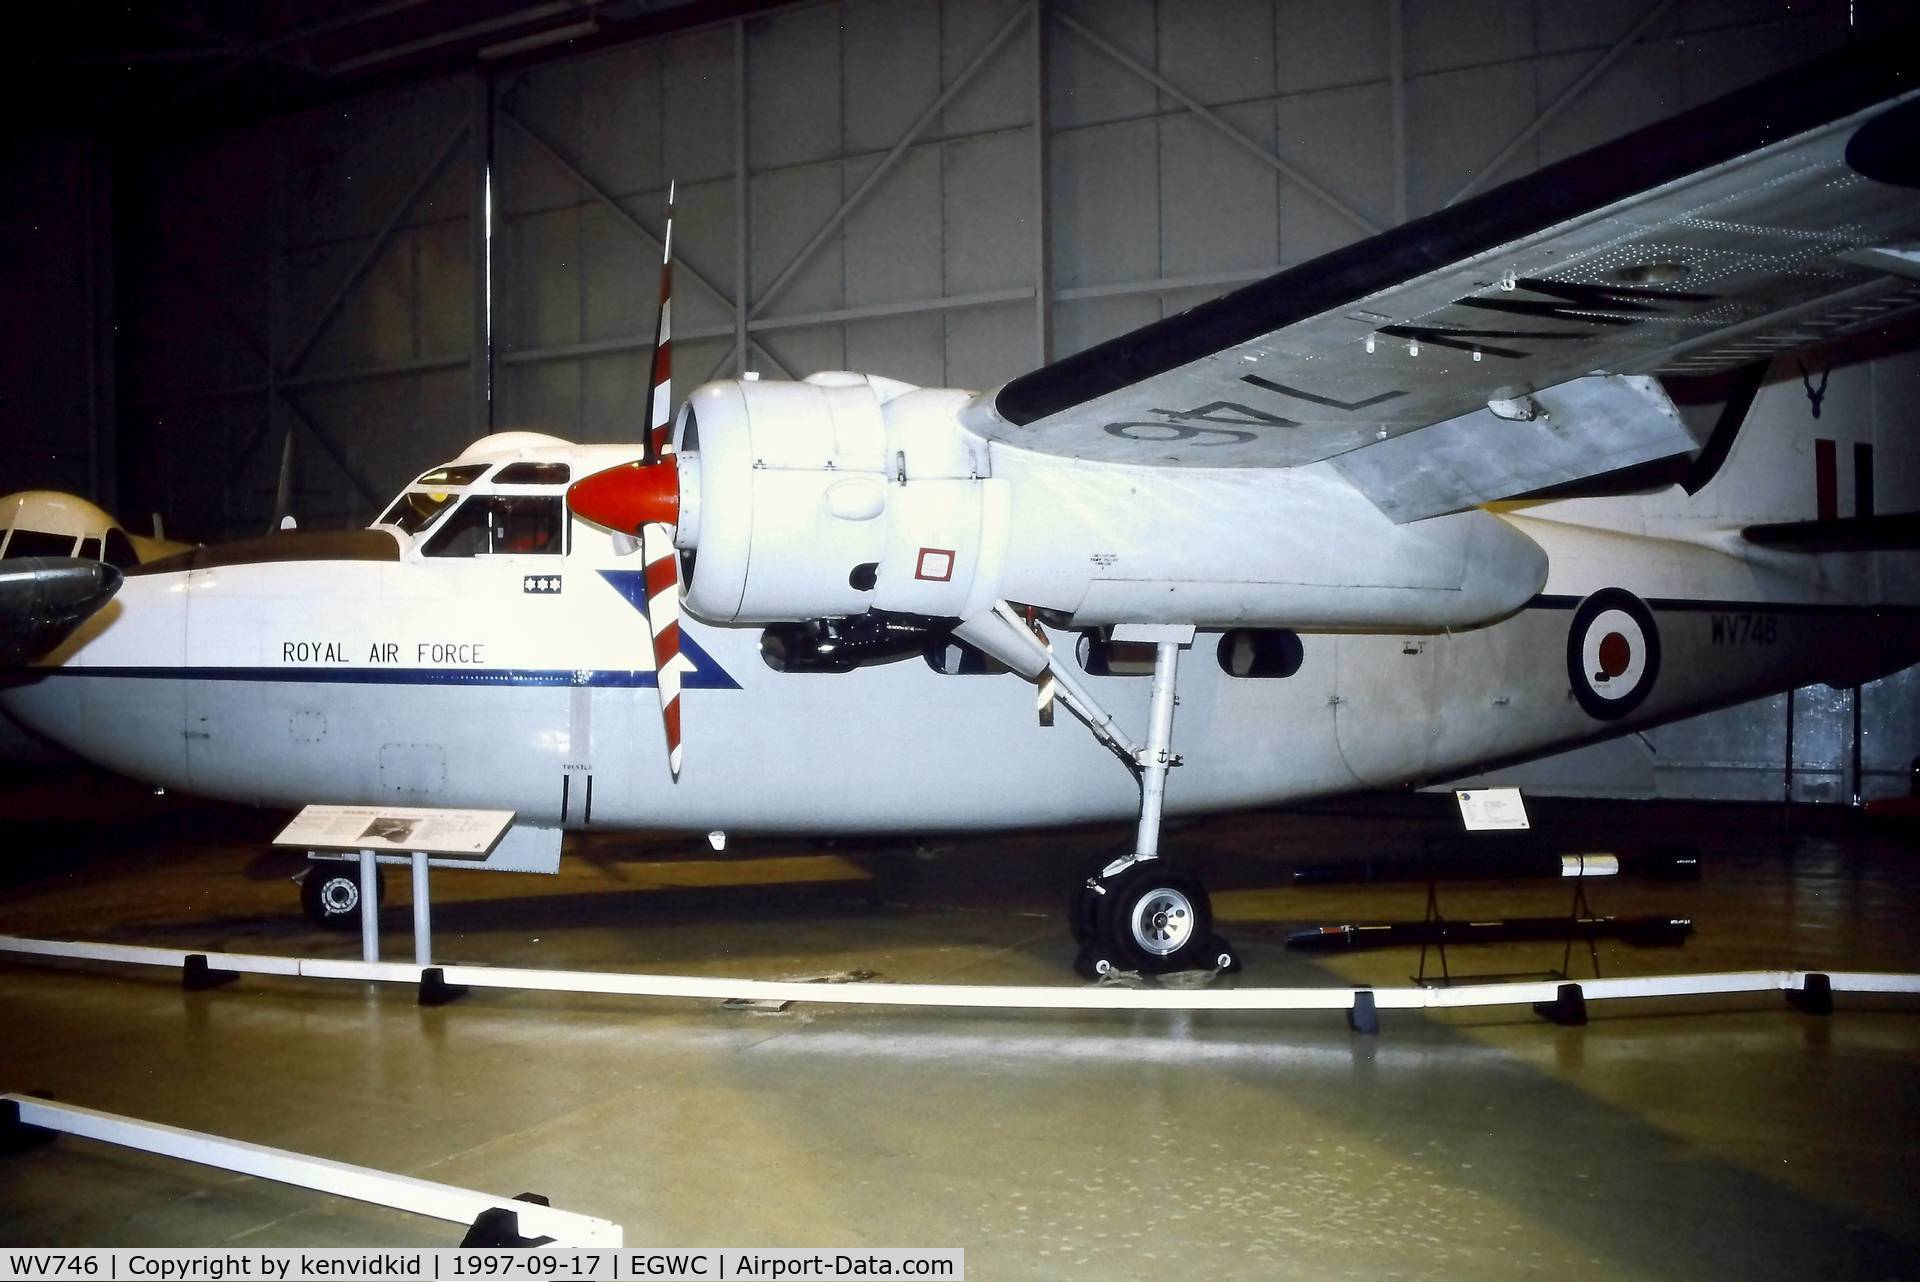 WV746, Hunting Percival P-66 Pembroke C1 C/N PAC/66/53, A visit to Cosford in 1997.